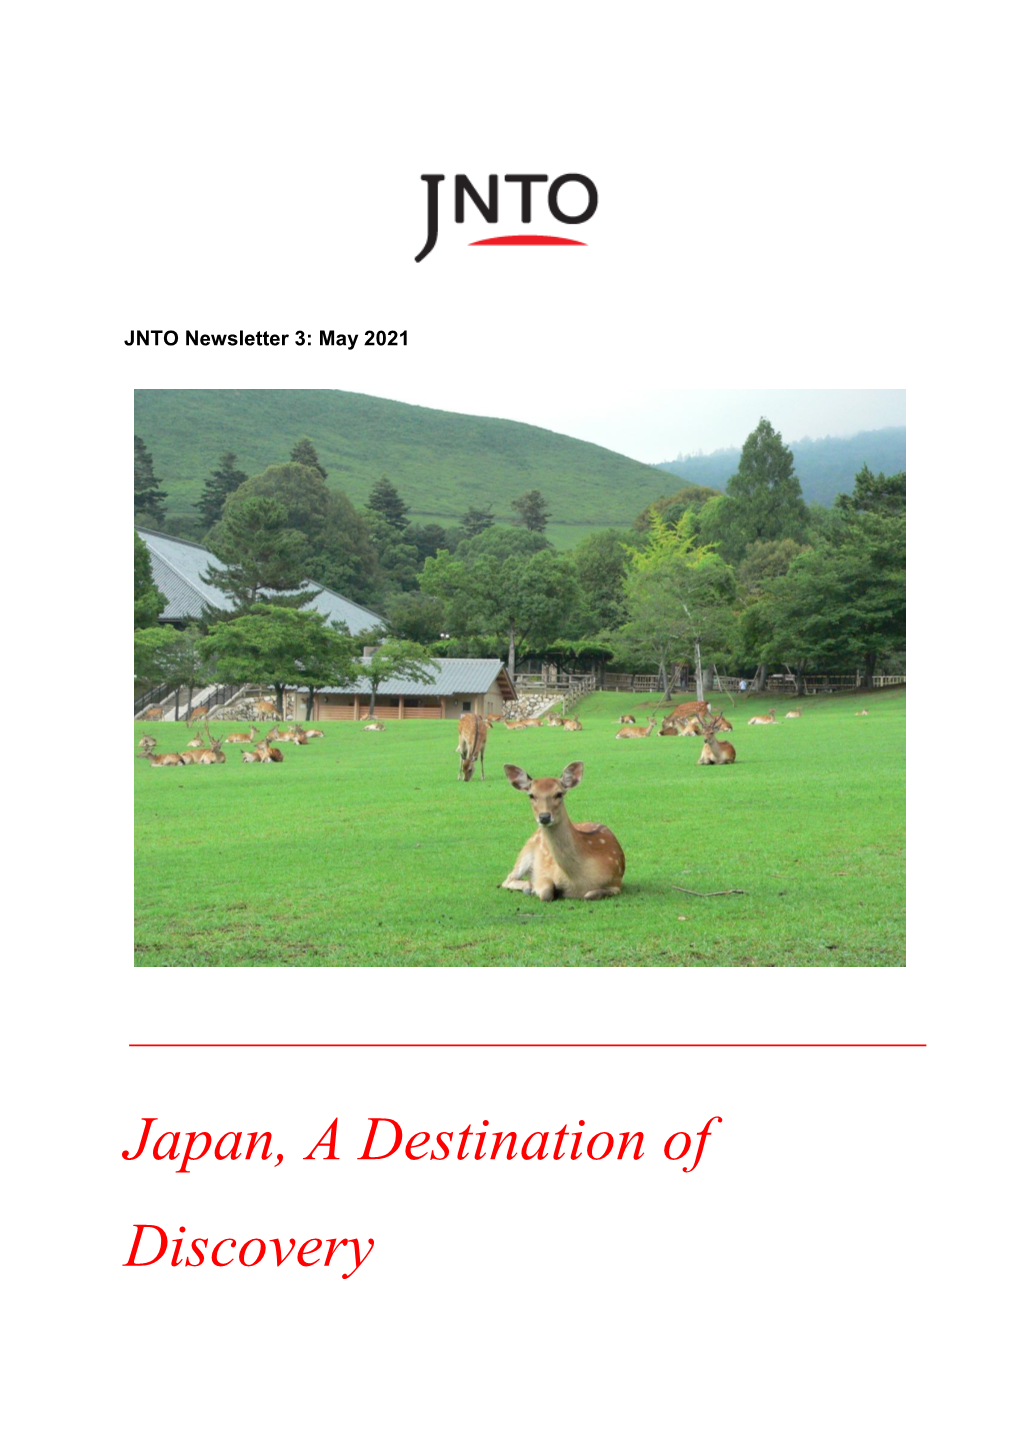 Japan, a Destination of Discovery